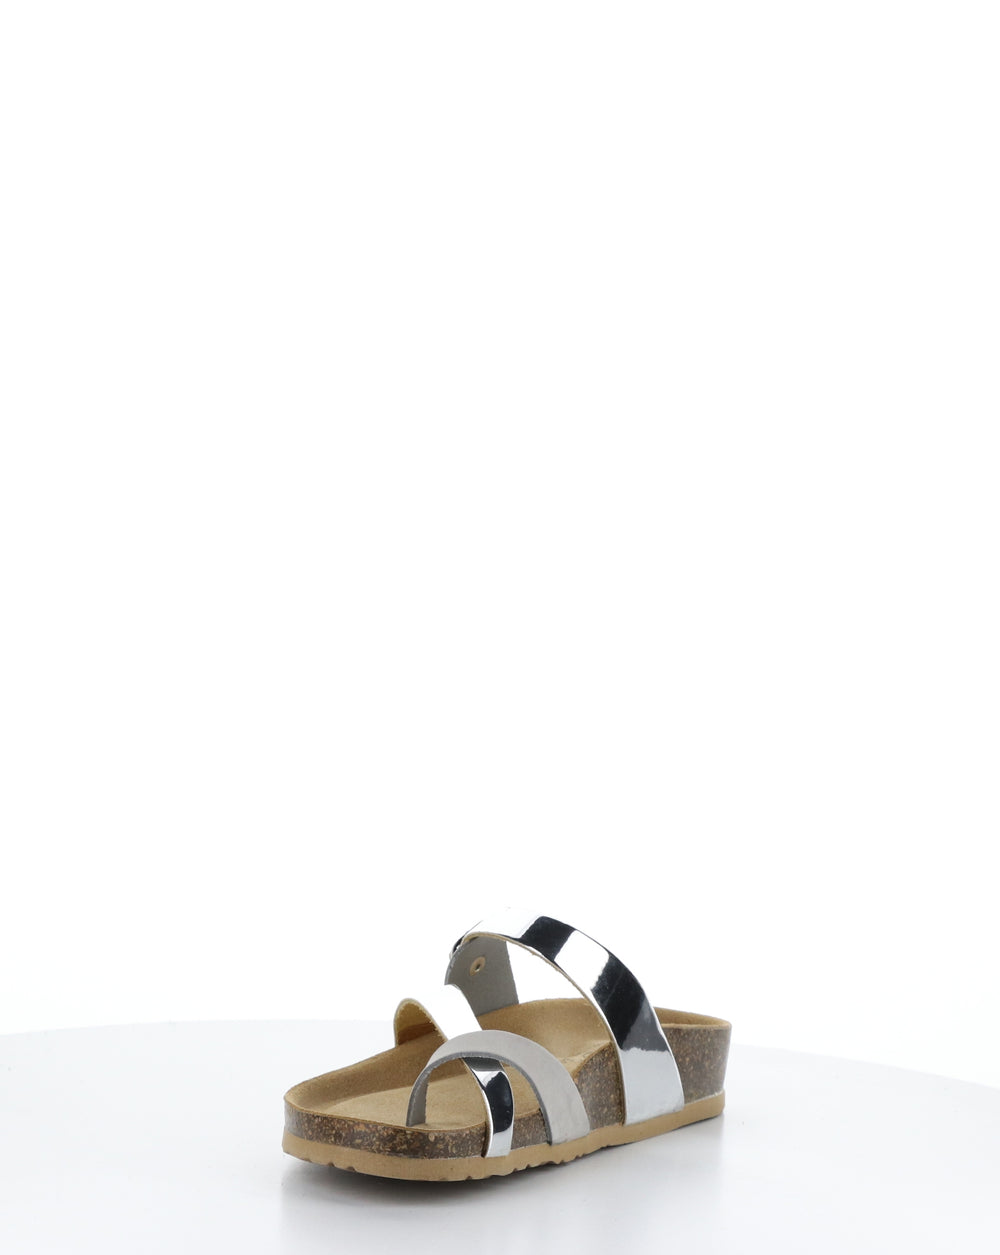 PARR PEARL/SILVER Slip-on Sandals